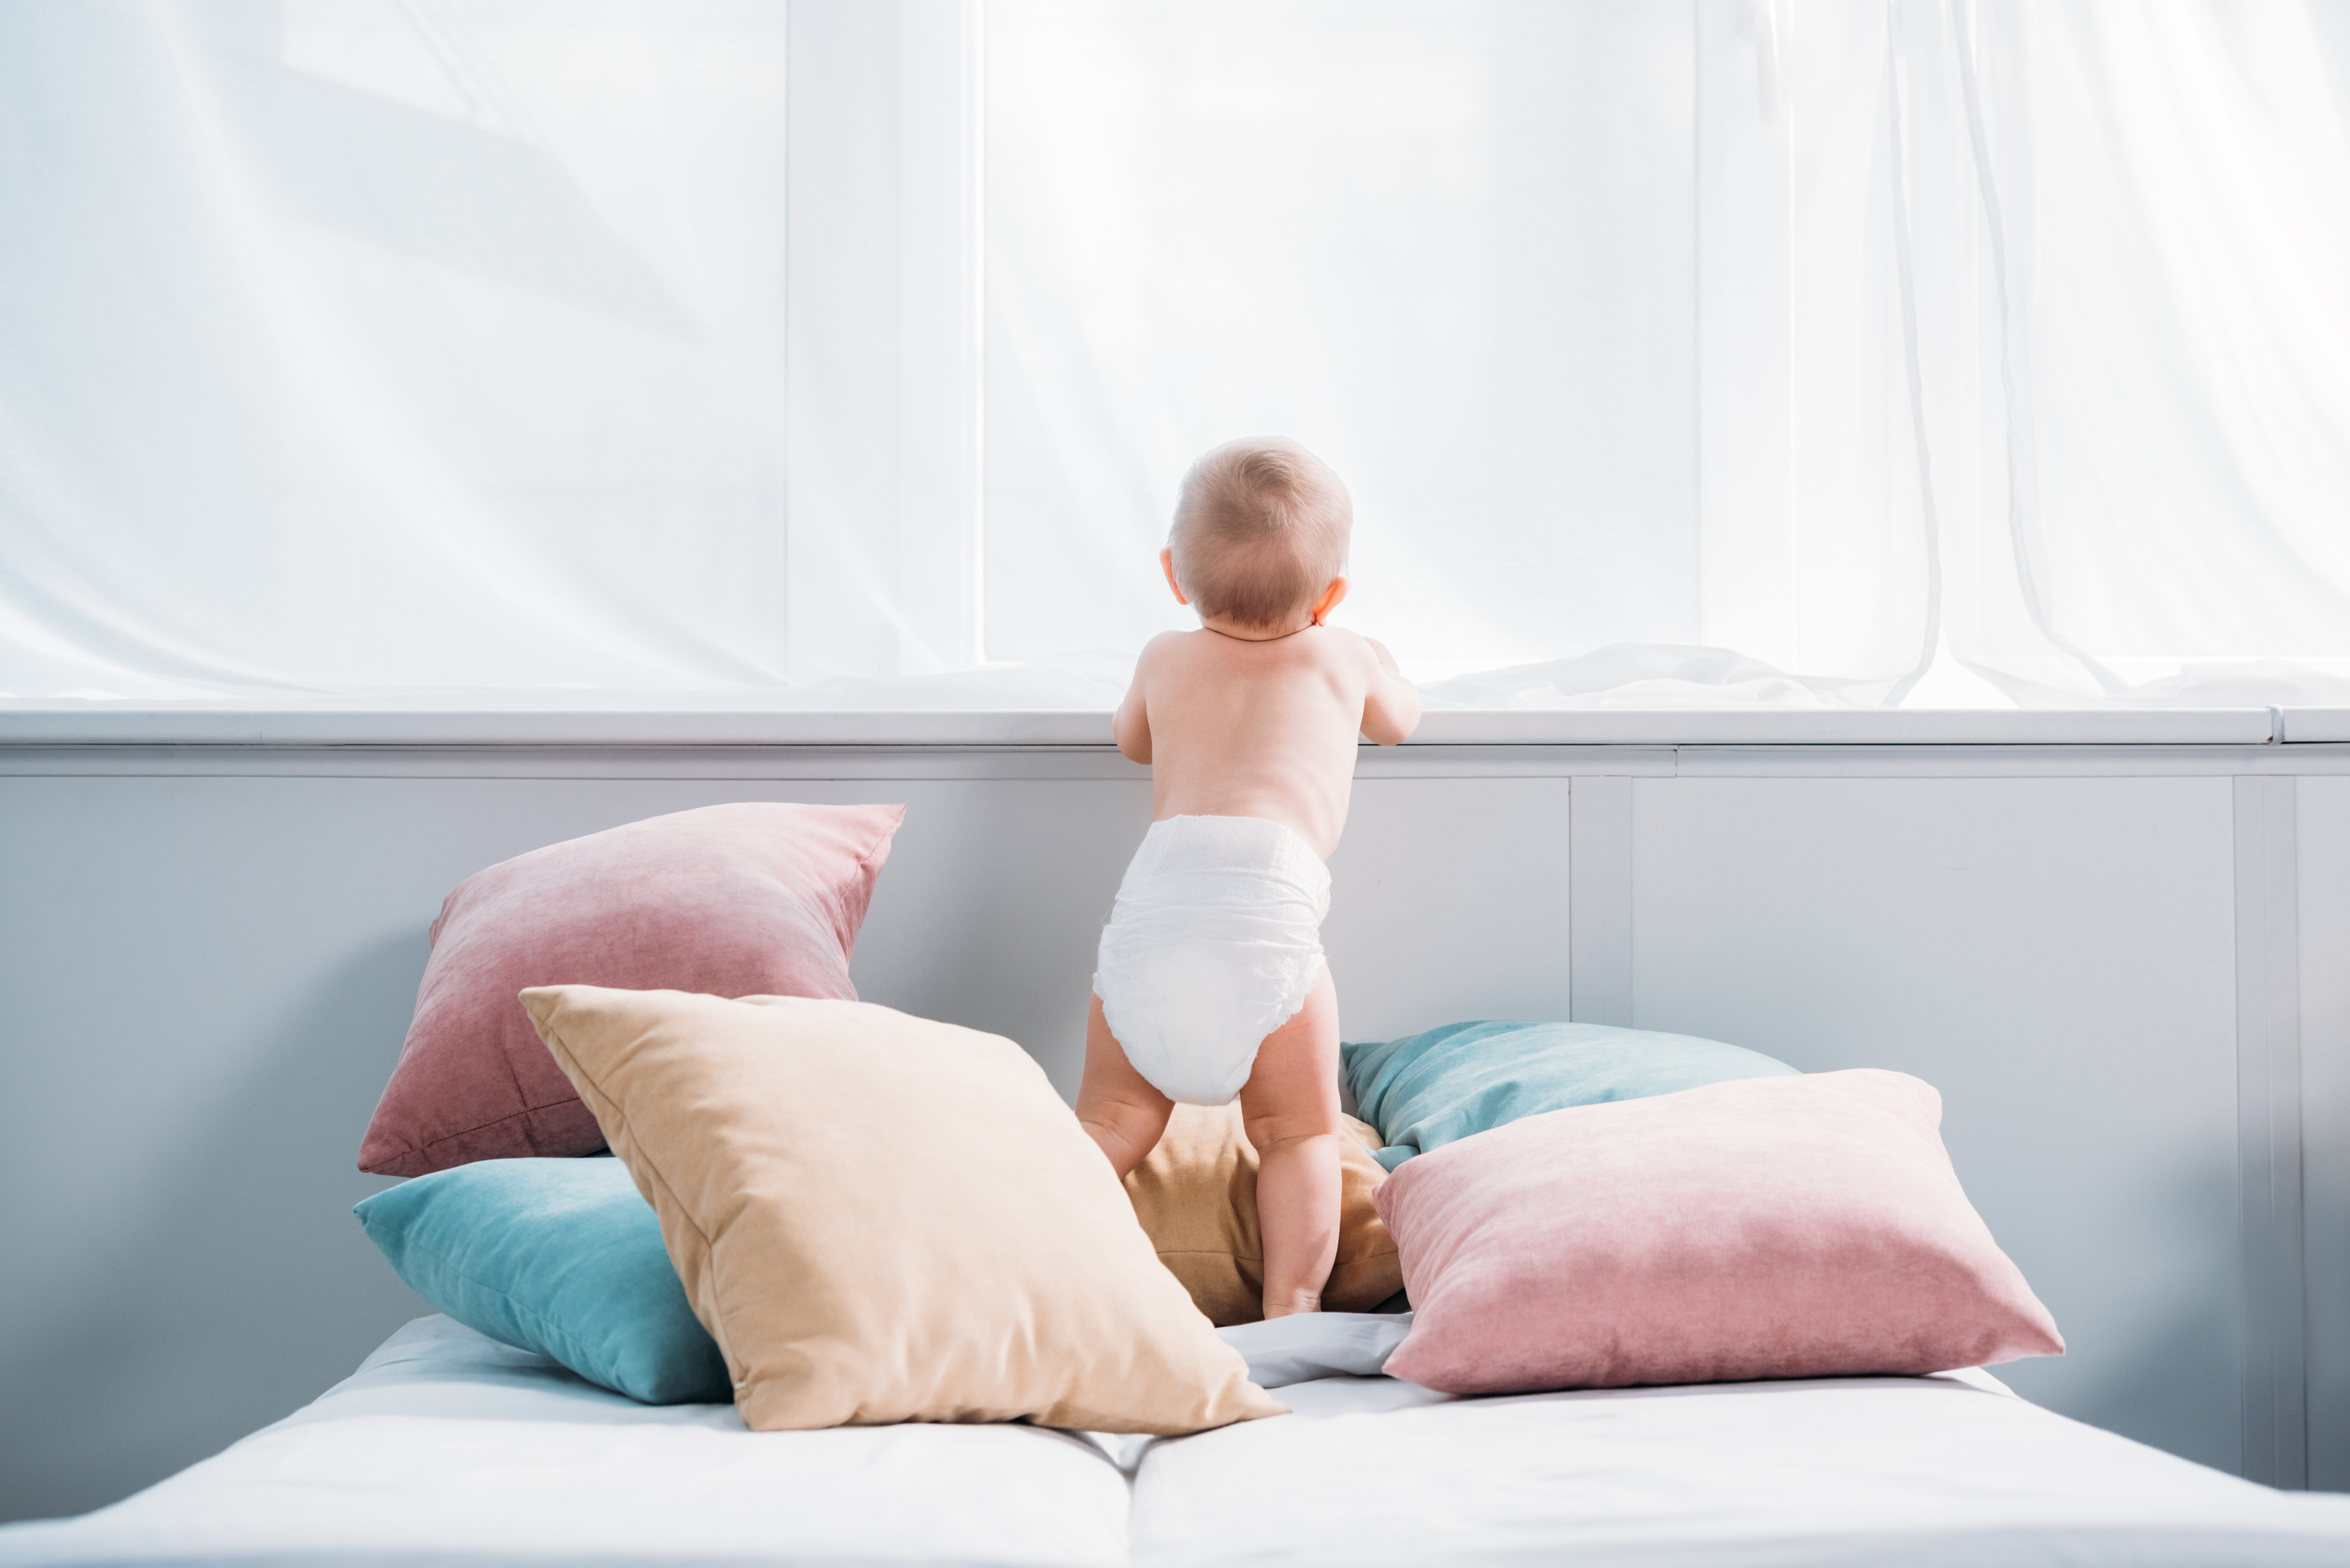 Baby in diaper standing on bed. | Photo: Shutterstock